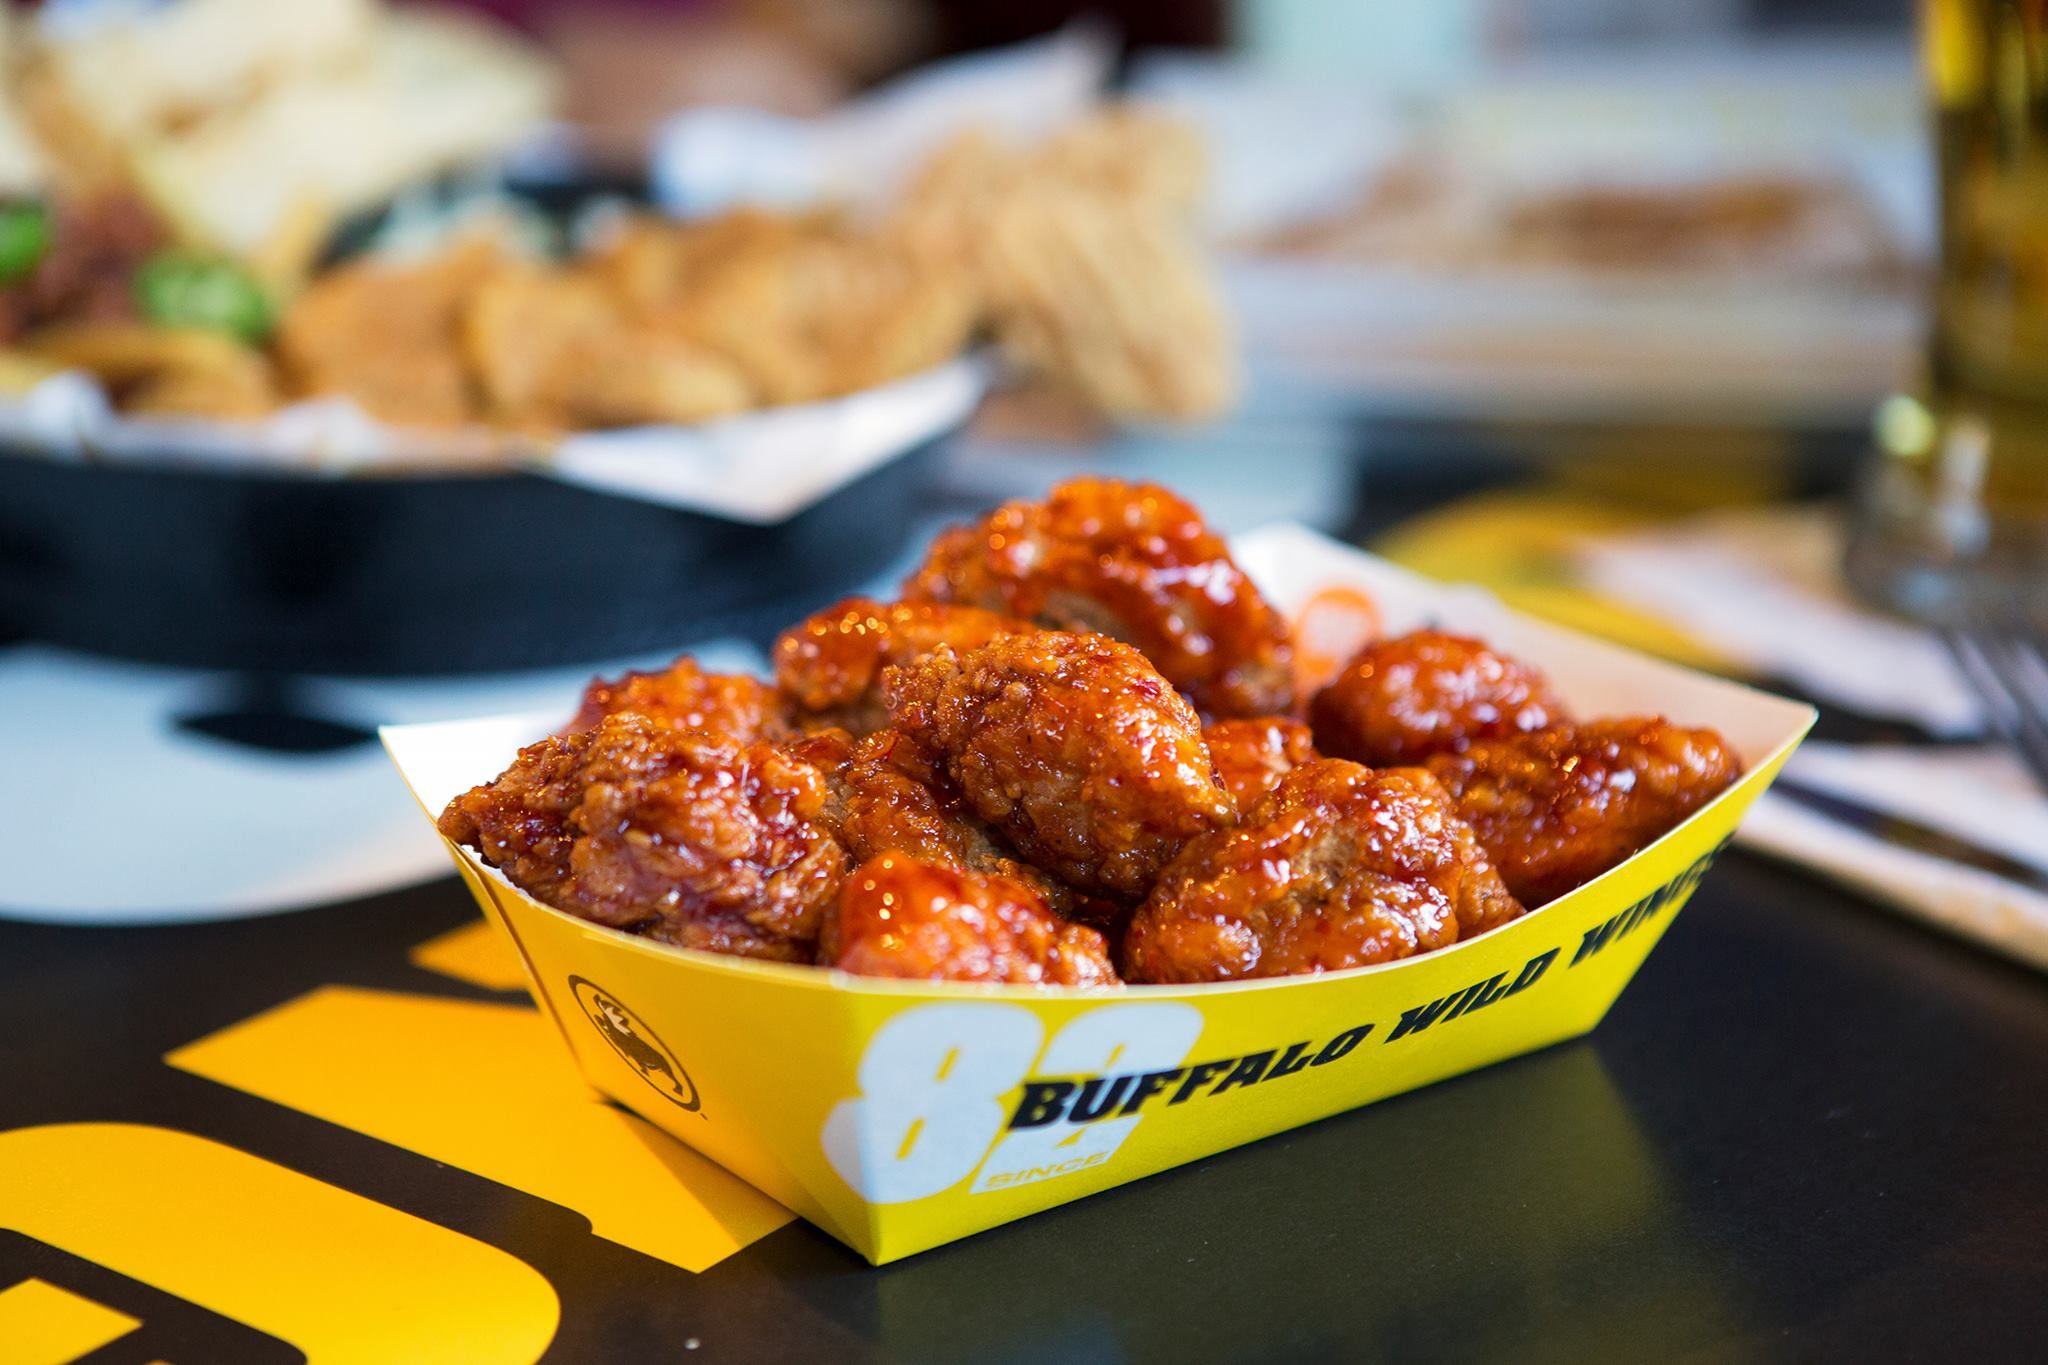 How to Play Wild Wings Bracket Pick 'Em Game - Buffalo Wild Wings March Madness Game Prizes